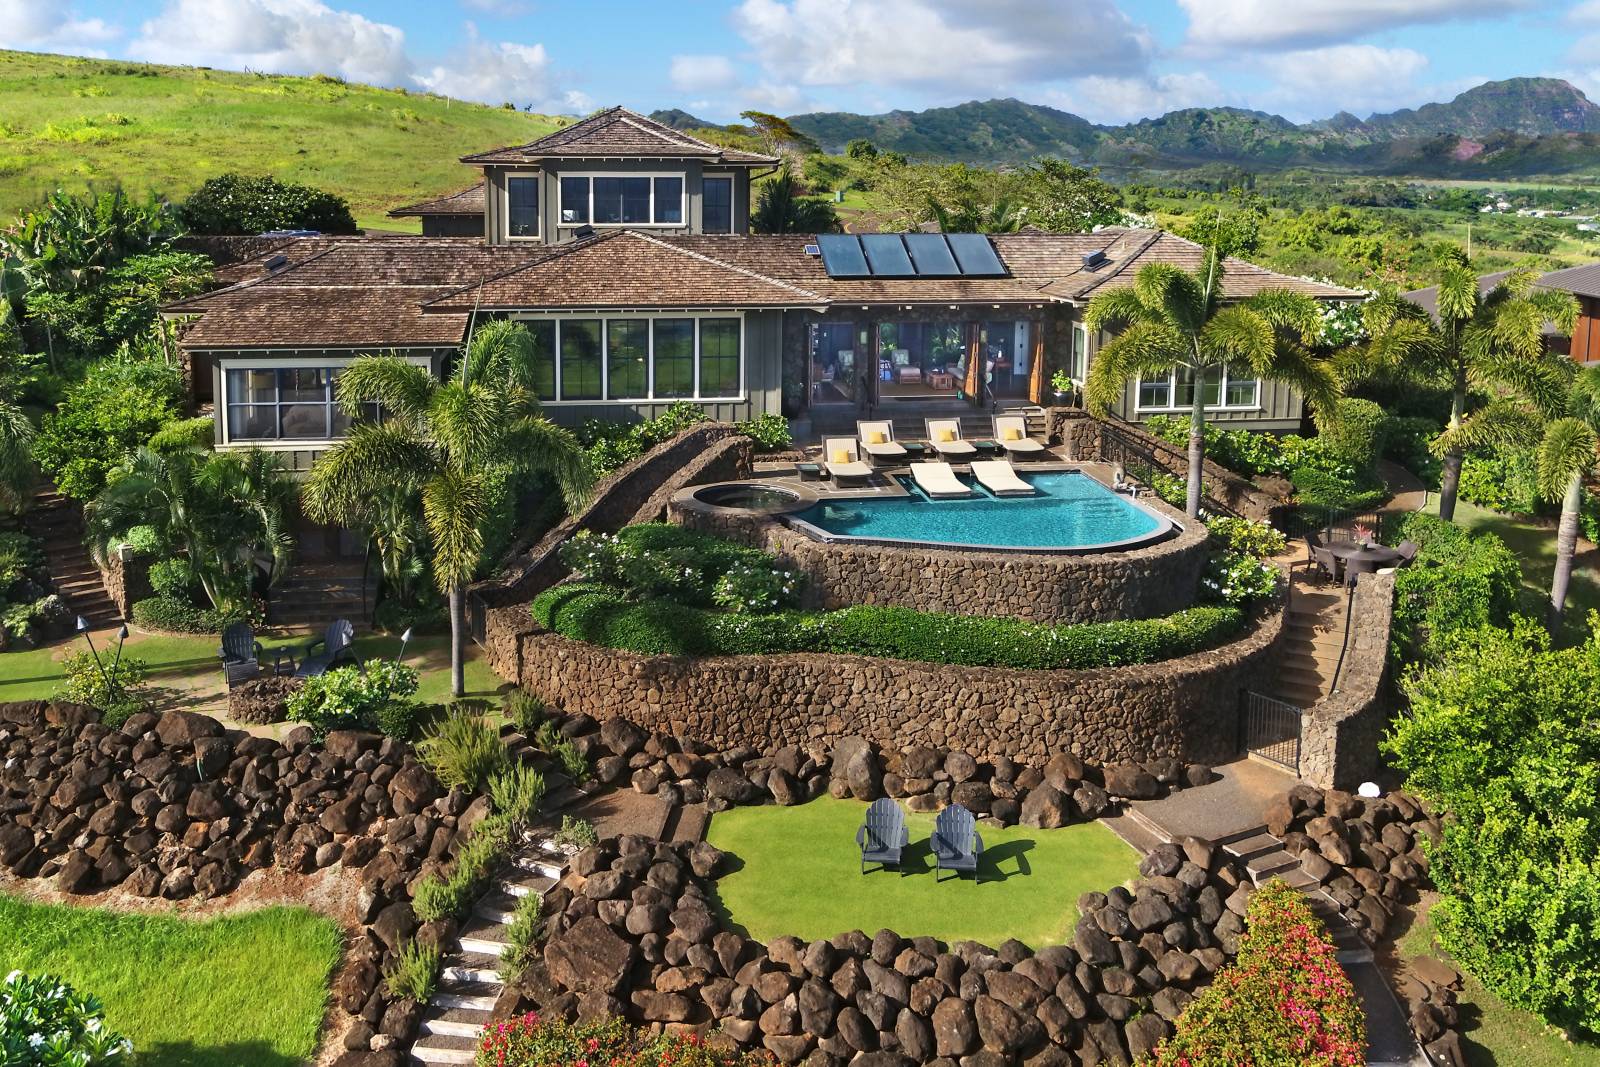 Architecture In Hawaii Part 1 The Plantation Home Hawaii Real Estate Market Trends 